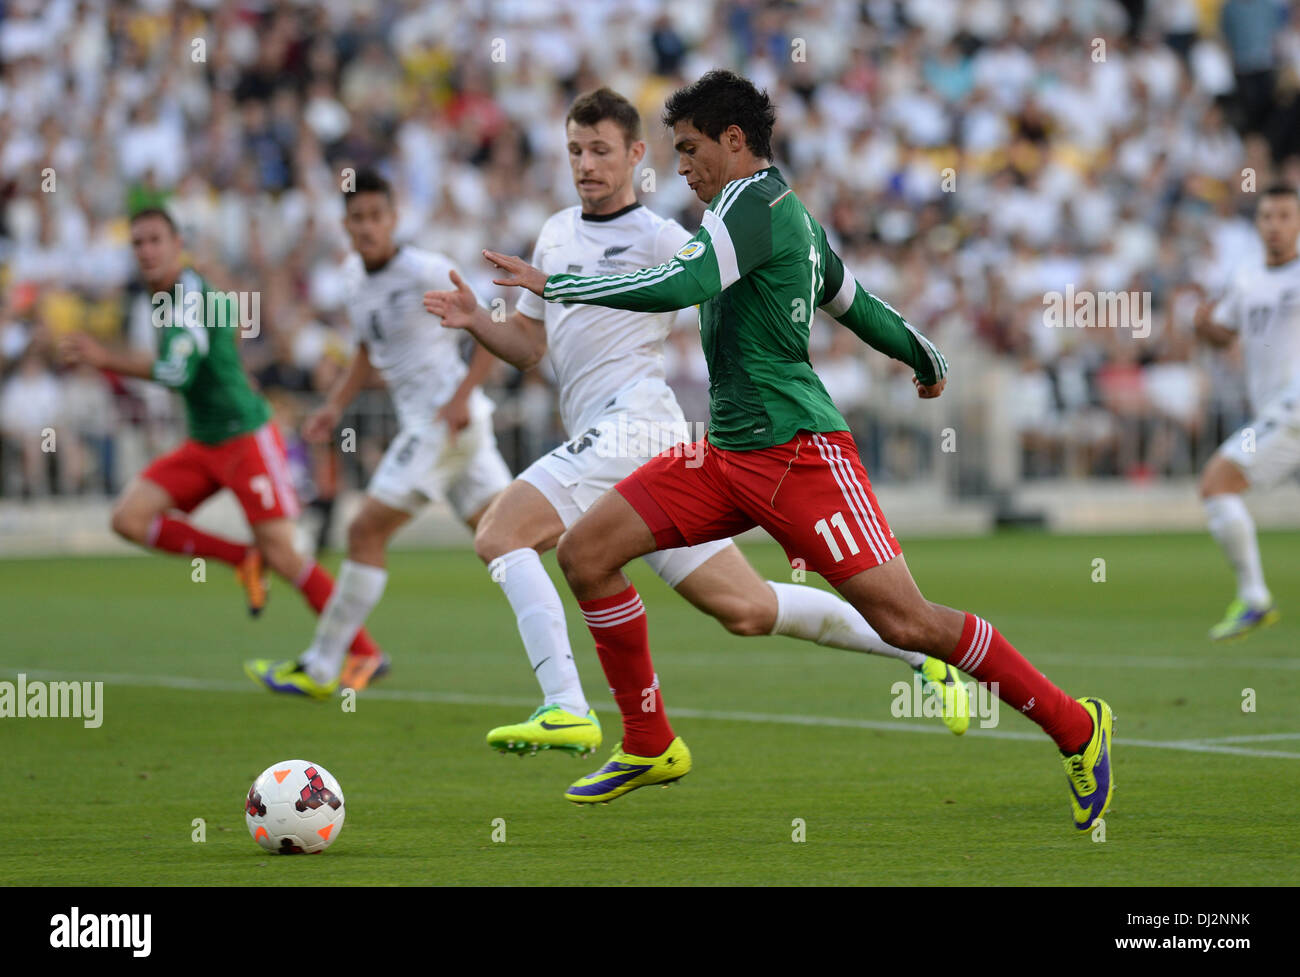 Wellington, New Zealand. 20th Nov, 2013. Raul Jimenez in action during the FIFA Football World Cup Qualifier 2nd Leg match. New Zealand All Whites v Mexico. Credit:  Action Plus Sports/Alamy Live News Stock Photo